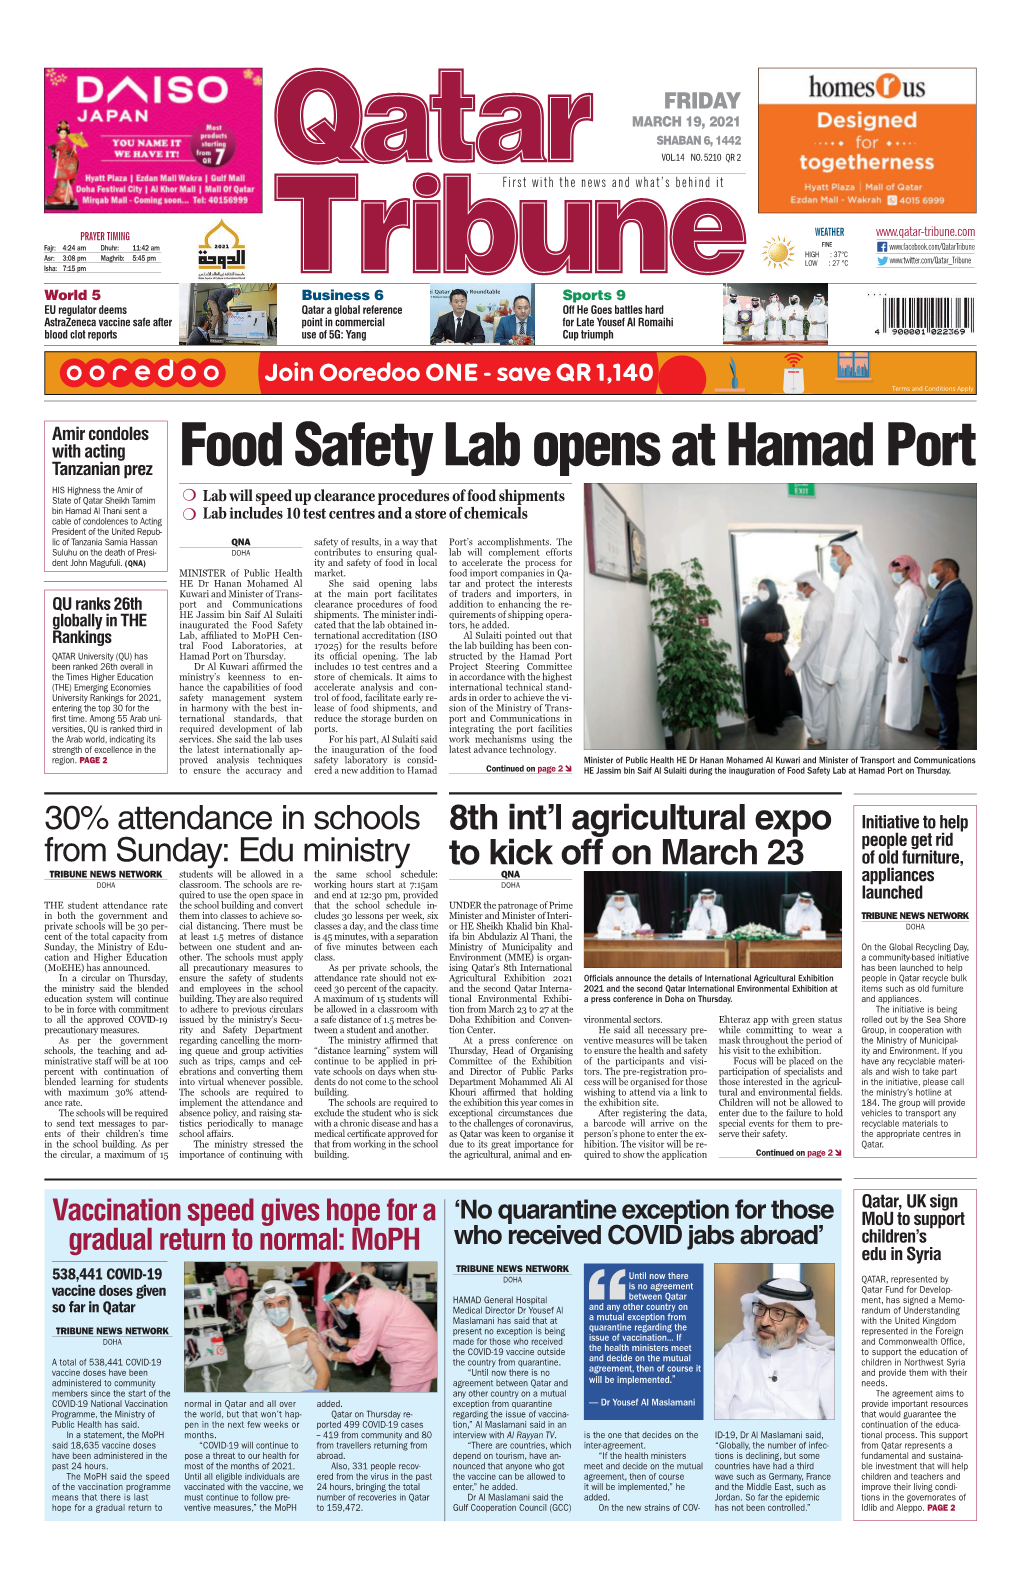 Food Safety Lab Opens at Hamad Port